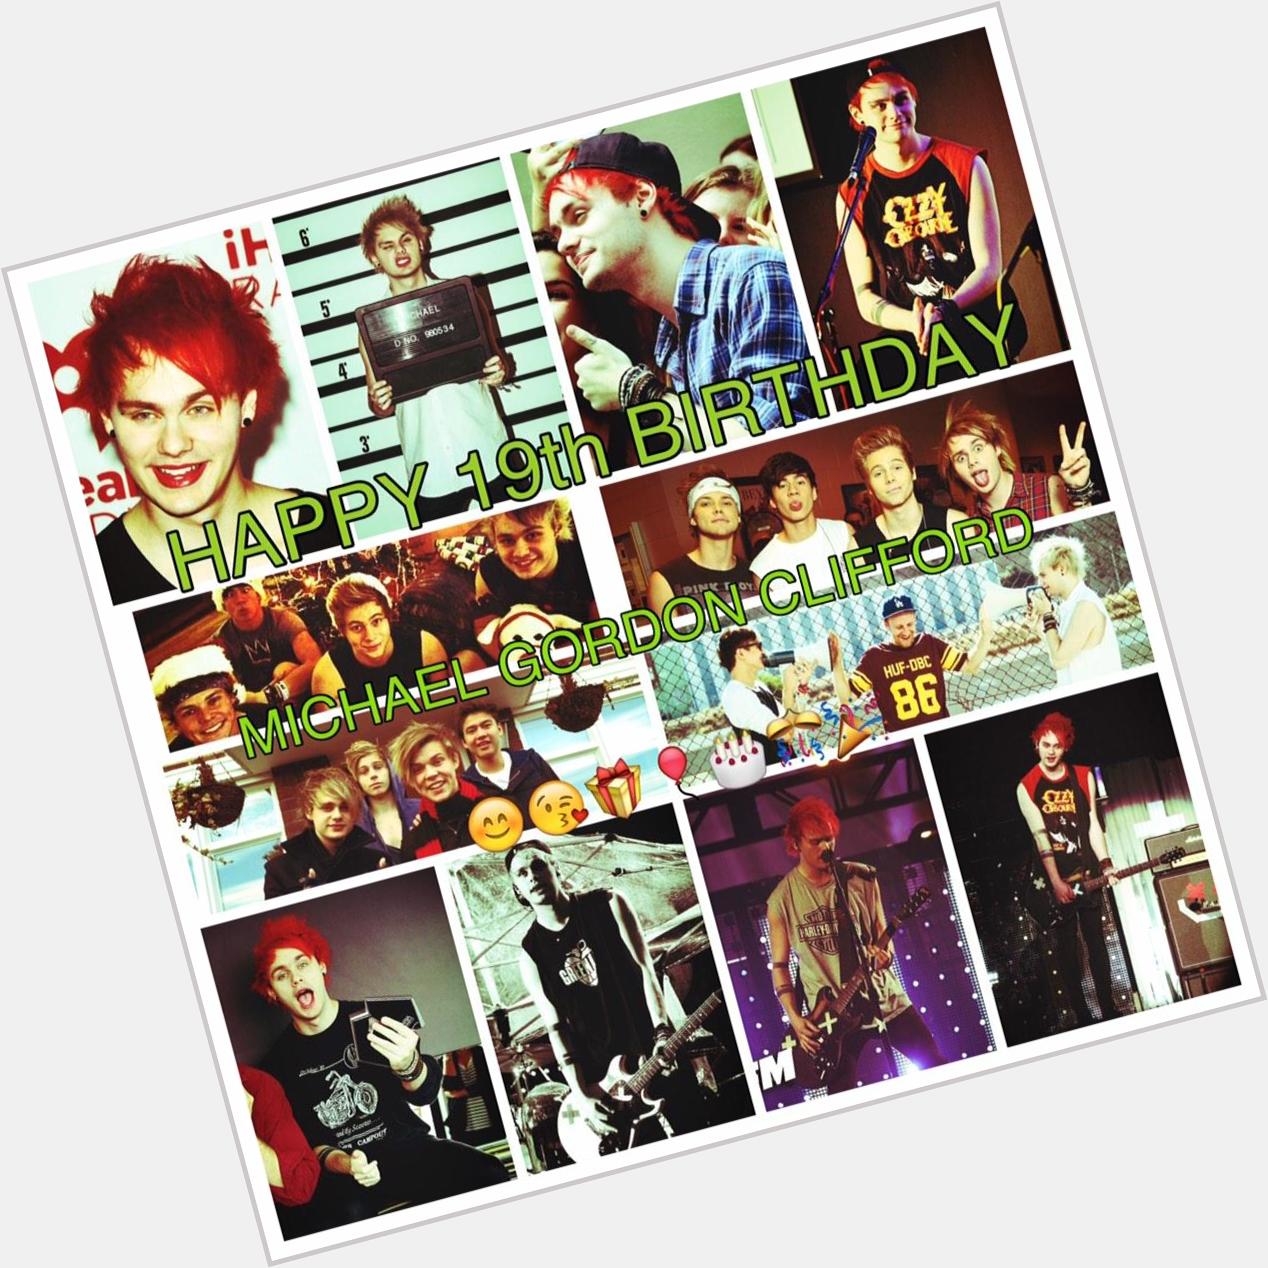 Happy 19th birthday Michael Gordon Clifford, cant believe your all growing up so quickly   ly   